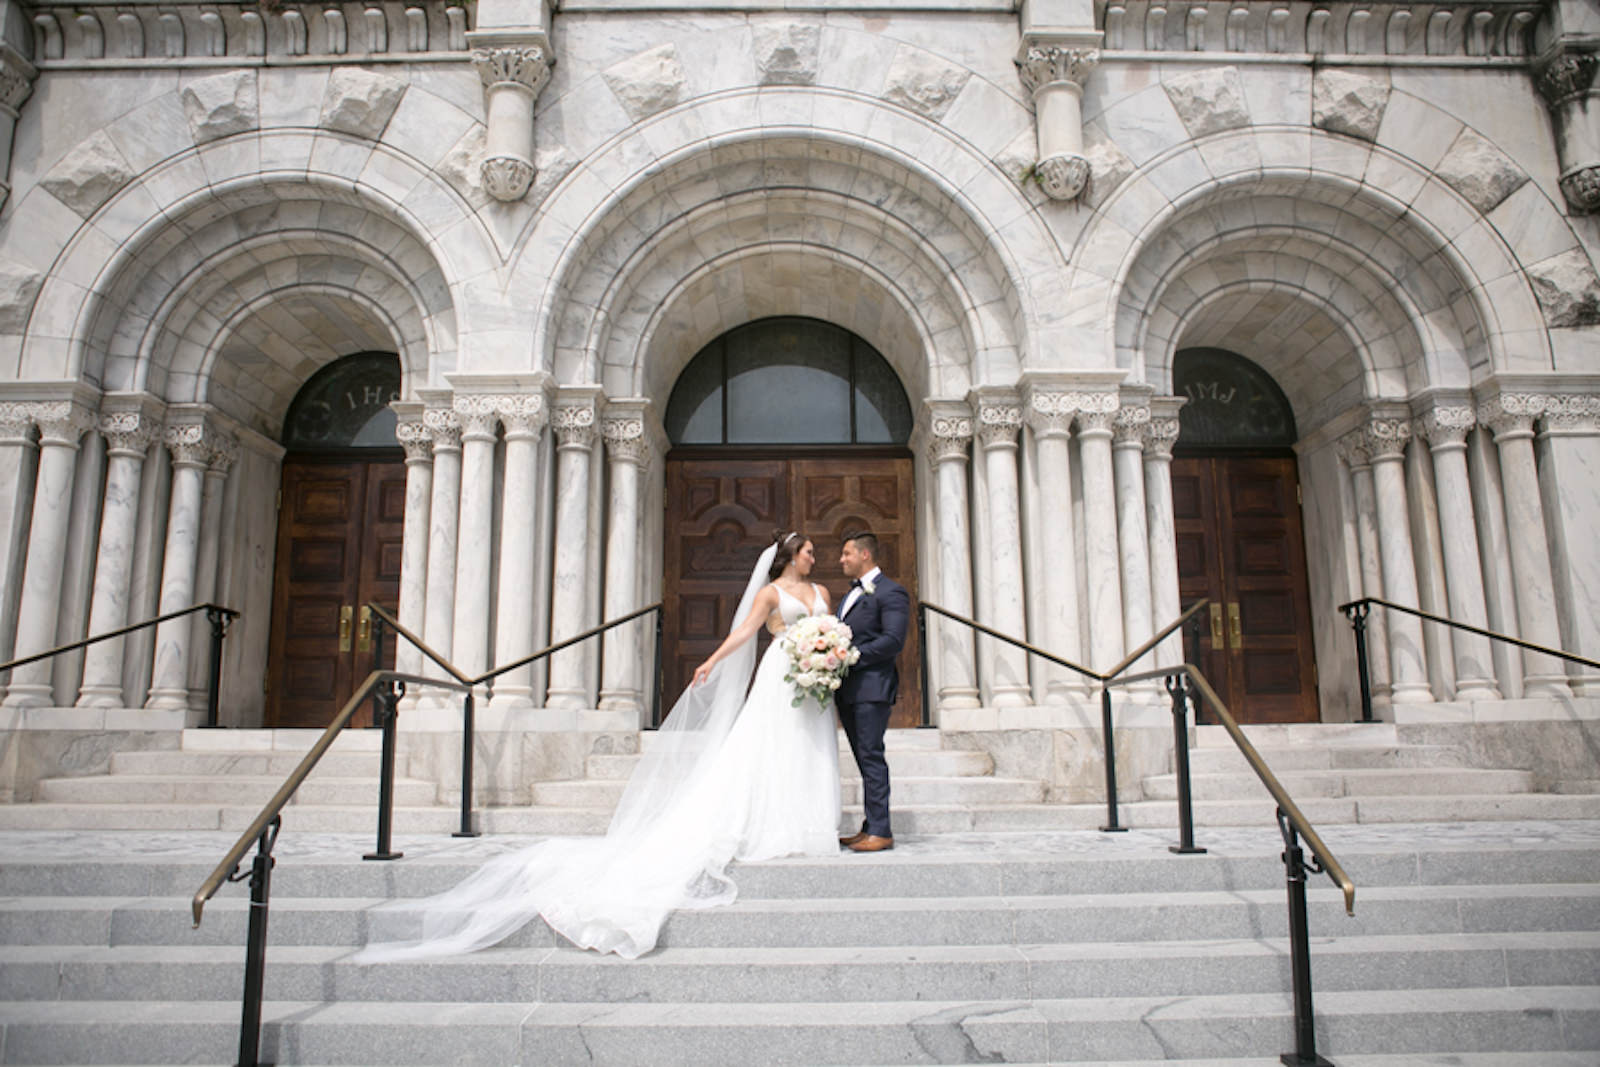 Outdoor Downtown Tampa Bride and Groom Portrait at Traditional Catholic Ceremony Cathedral Church Staircase | V Neck Illusion Lace A Line Ballgown Wedding Dress with Rhinestone Waist Band and Cathedral Veil | Groom in Classic Navy Blue Suit with Bow Tie | Blush Pink and Ivory Roses and Peonies Bridal Bouquet with Eucalyptus Greenery | Carrie Wildes Photography